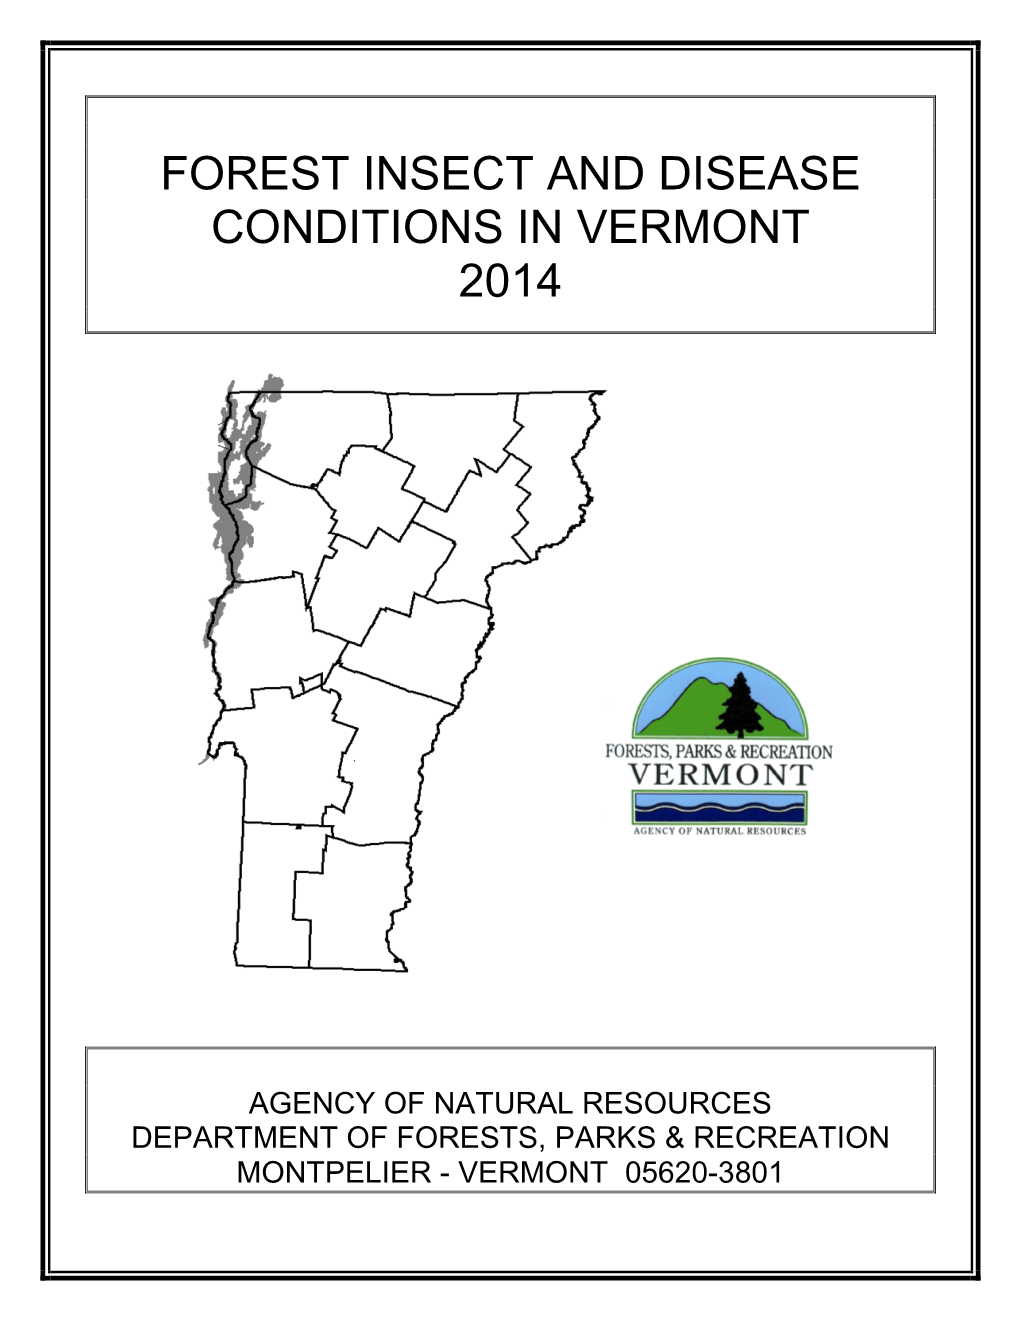 Forest Insect and Disease Conditions in Vermont 2014